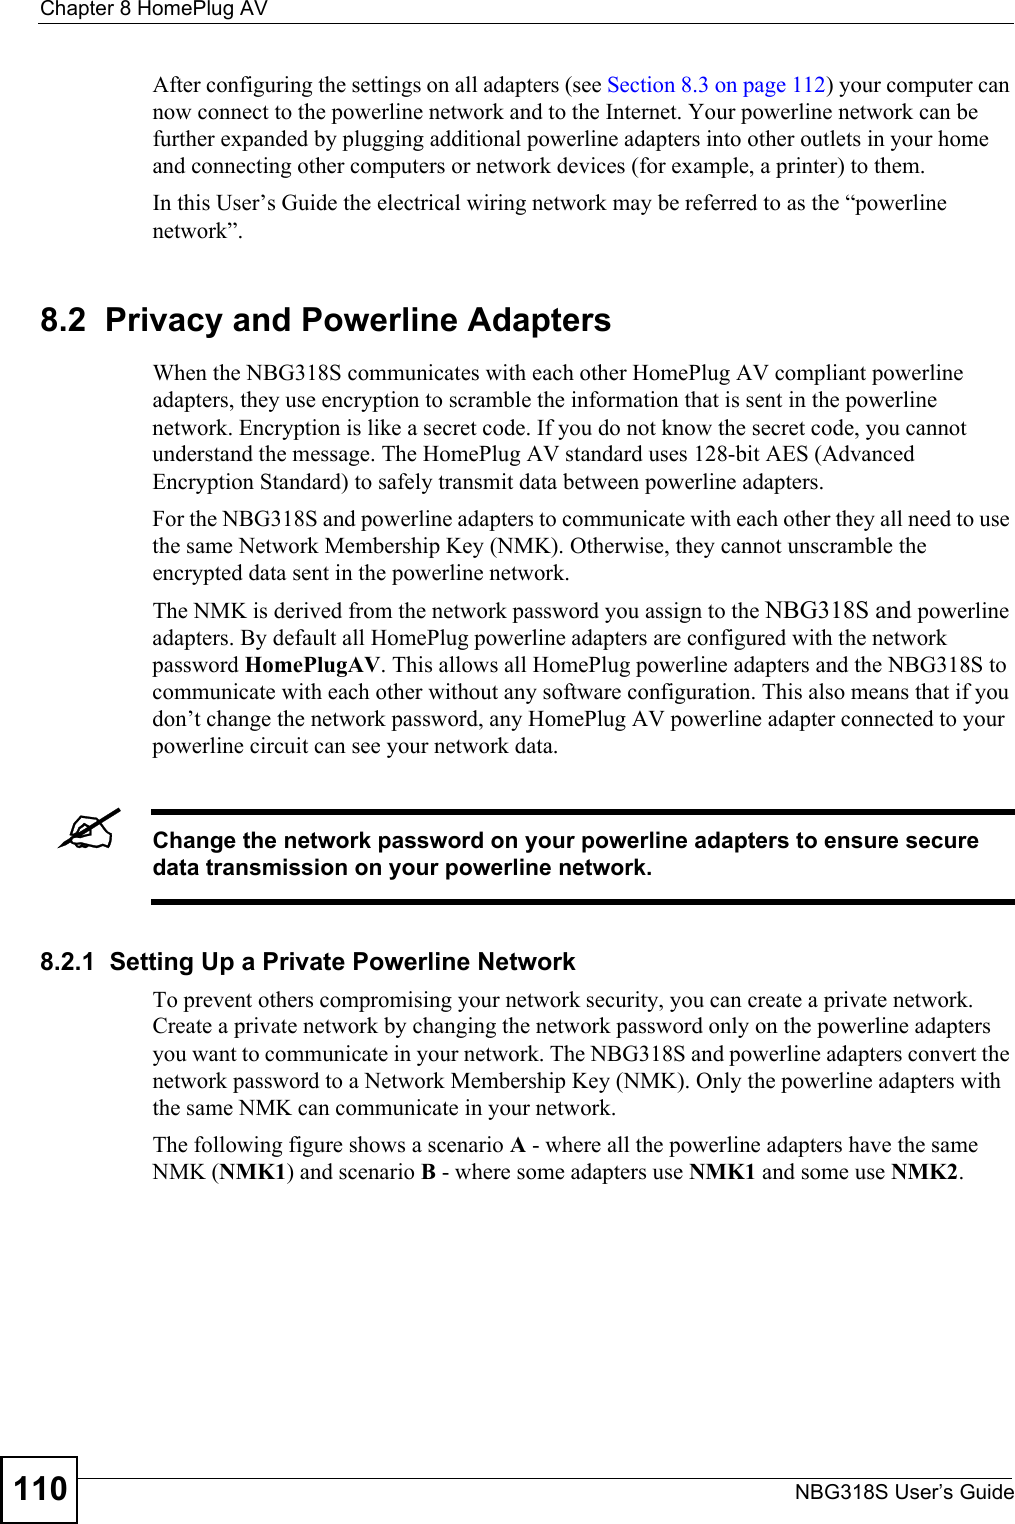 Chapter 8 HomePlug AVNBG318S User’s Guide110After configuring the settings on all adapters (see Section 8.3 on page 112) your computer can now connect to the powerline network and to the Internet. Your powerline network can be further expanded by plugging additional powerline adapters into other outlets in your home and connecting other computers or network devices (for example, a printer) to them. In this User’s Guide the electrical wiring network may be referred to as the “powerline network”.8.2  Privacy and Powerline AdaptersWhen the NBG318S communicates with each other HomePlug AV compliant powerline adapters, they use encryption to scramble the information that is sent in the powerline network. Encryption is like a secret code. If you do not know the secret code, you cannot understand the message. The HomePlug AV standard uses 128-bit AES (Advanced Encryption Standard) to safely transmit data between powerline adapters.For the NBG318S and powerline adapters to communicate with each other they all need to use the same Network Membership Key (NMK). Otherwise, they cannot unscramble the encrypted data sent in the powerline network. The NMK is derived from the network password you assign to the NBG318S and powerline adapters. By default all HomePlug powerline adapters are configured with the network password HomePlugAV. This allows all HomePlug powerline adapters and the NBG318S to communicate with each other without any software configuration. This also means that if you don’t change the network password, any HomePlug AV powerline adapter connected to your powerline circuit can see your network data. &quot;Change the network password on your powerline adapters to ensure secure data transmission on your powerline network.8.2.1  Setting Up a Private Powerline Network To prevent others compromising your network security, you can create a private network. Create a private network by changing the network password only on the powerline adapters you want to communicate in your network. The NBG318S and powerline adapters convert the network password to a Network Membership Key (NMK). Only the powerline adapters with the same NMK can communicate in your network. The following figure shows a scenario A - where all the powerline adapters have the same NMK (NMK1) and scenario B - where some adapters use NMK1 and some use NMK2.